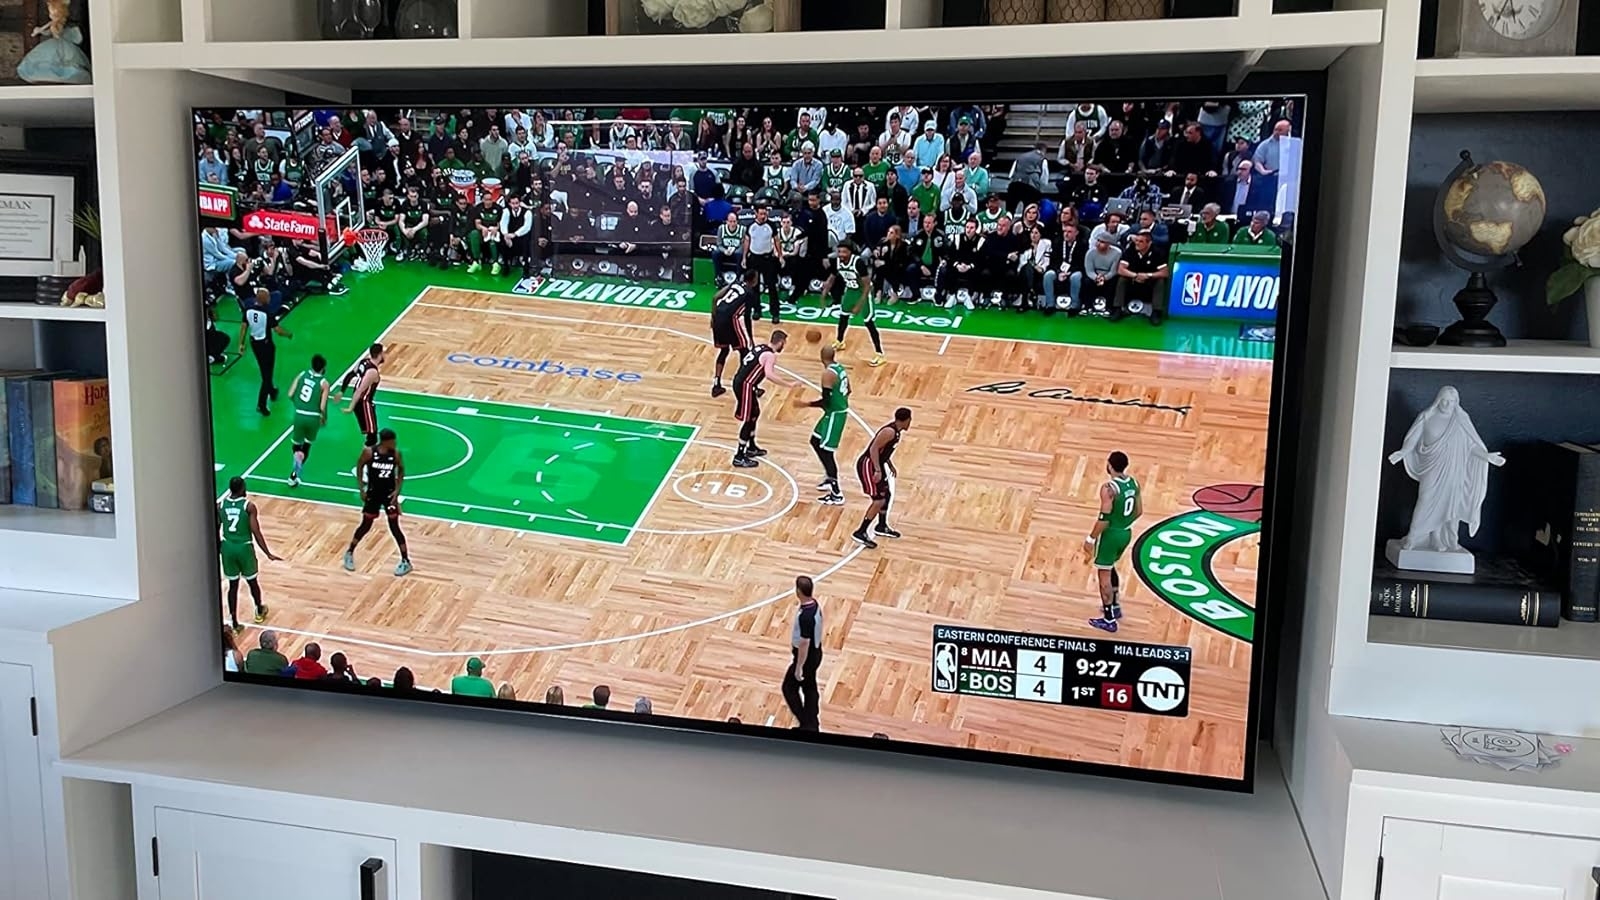 A TV screen showing a live basketball game between Miami and Boston teams, placed on a white entertainment center